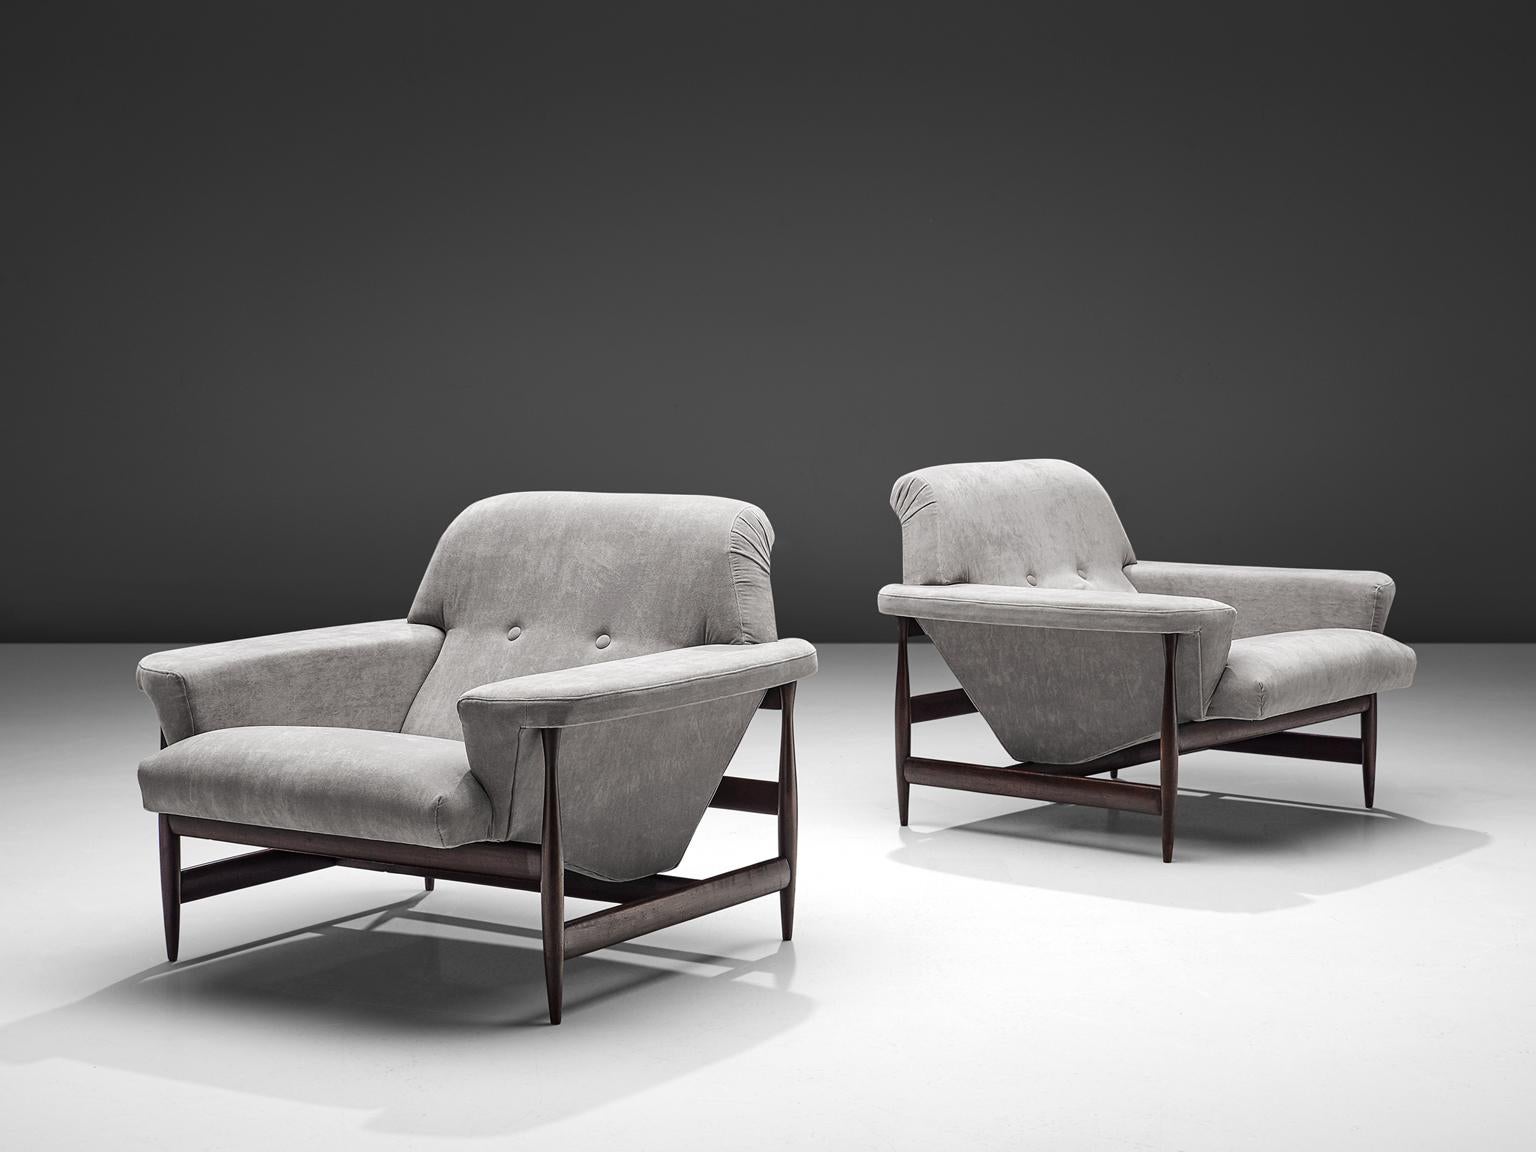 Pair of Brazilian lounge chairs, grey fabric and wood, Brazil, 1960.

This set of elegant easy chairs are from Brazilian origin. These armchairs are extremely comfortable, due their great proportions and shell like thick cushions. The frame has a